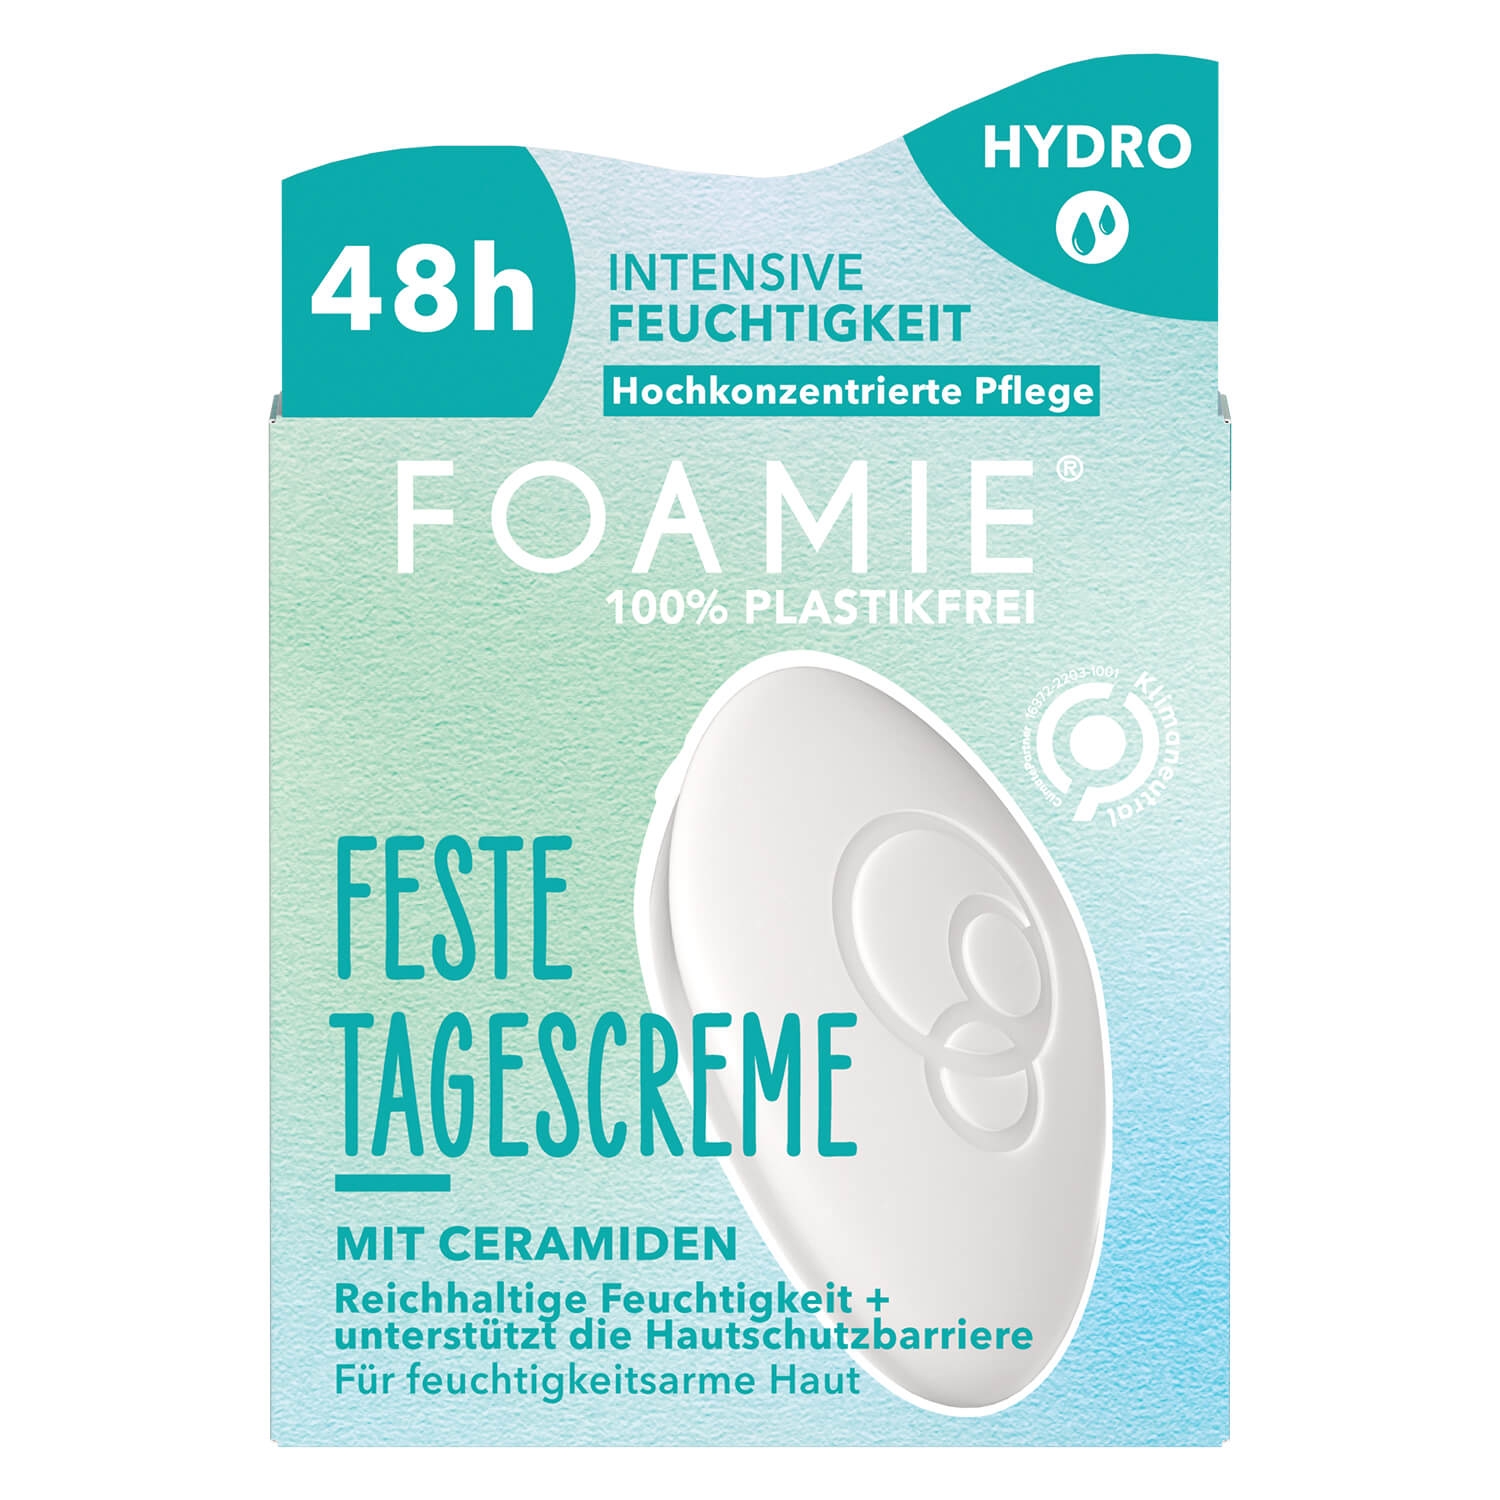 Product image from Foamie - Feste Tagescreme Hydro Intense Day